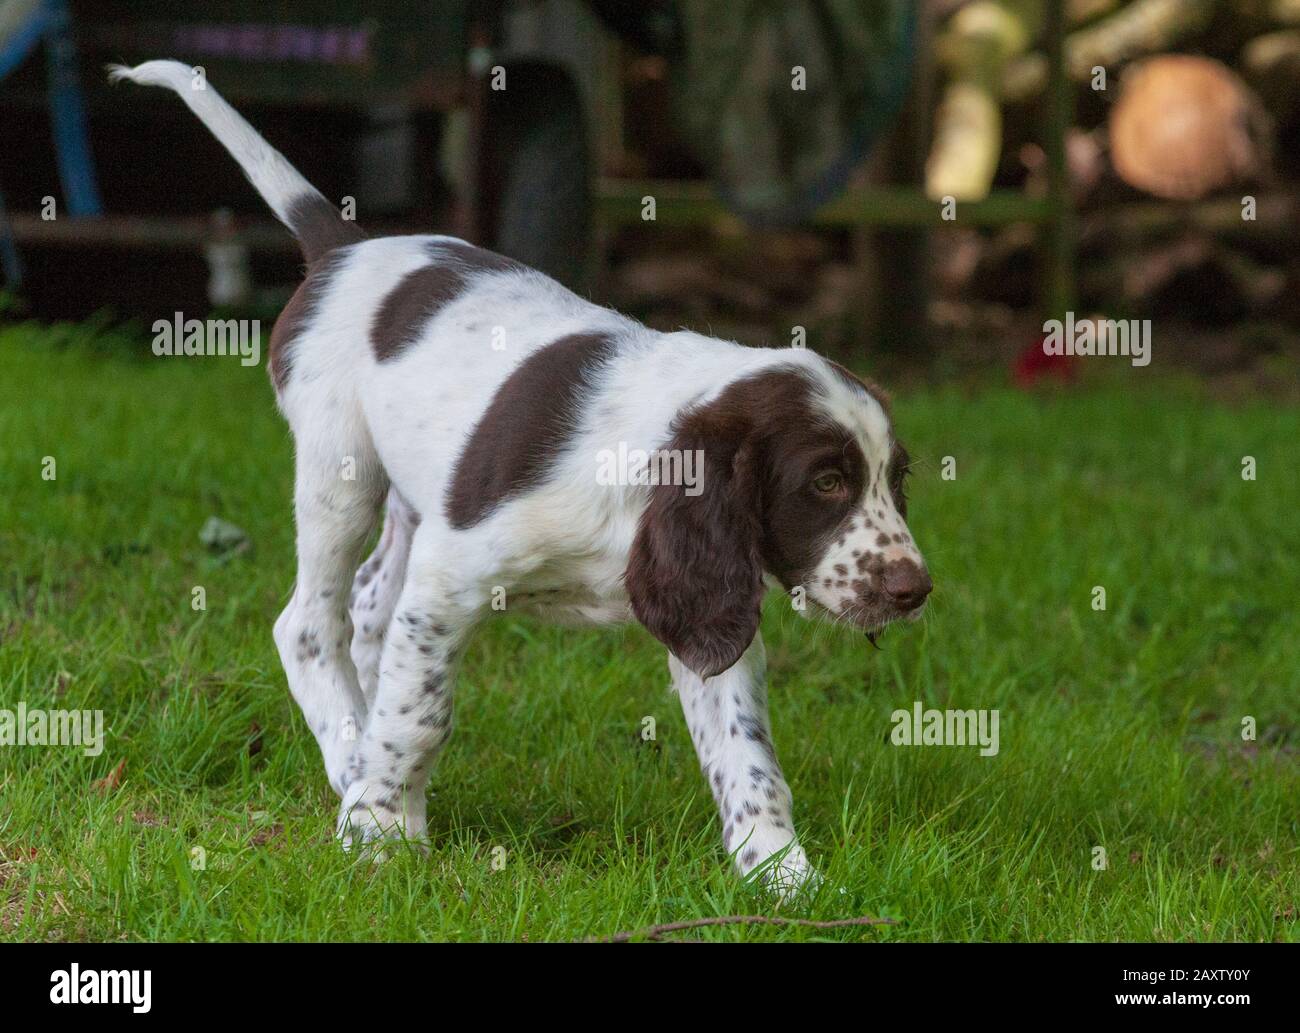 Picardy Spaniel Puppies High Resolution Stock Photography And Images Alamy